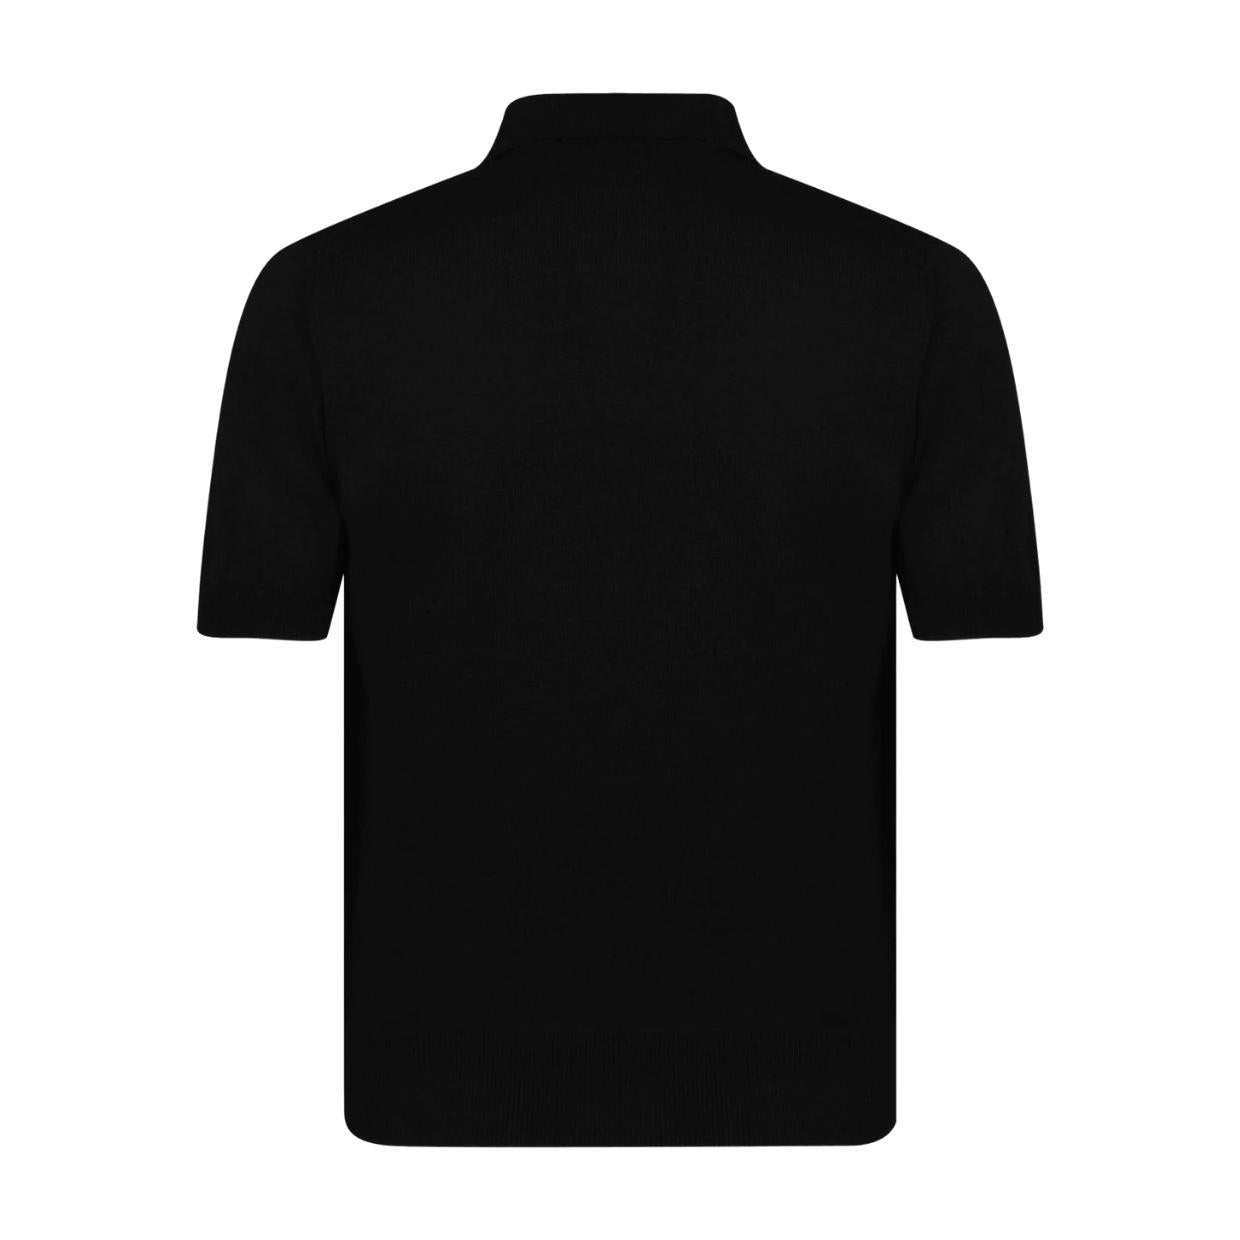 Vivienne Westwood Black Knitted Polo Shirt